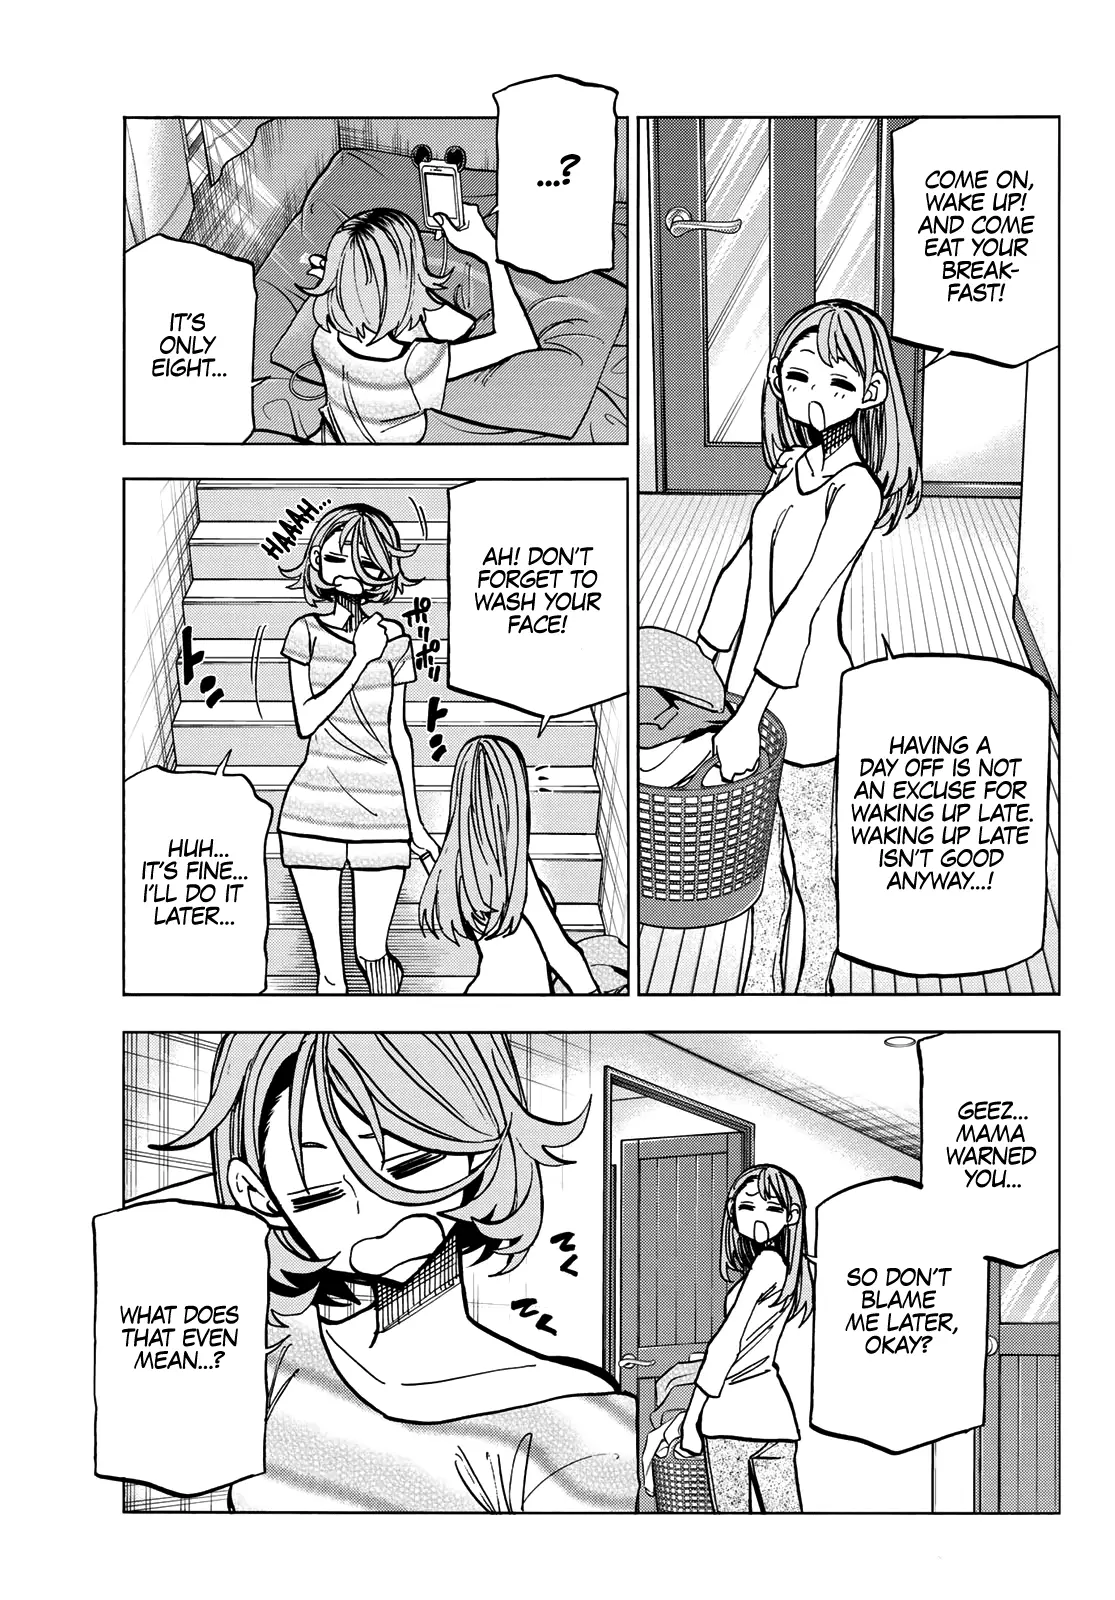 The Story Between A Dumb Prefect And A High School Girl With An Inappropriate Skirt Length - 9 page 6